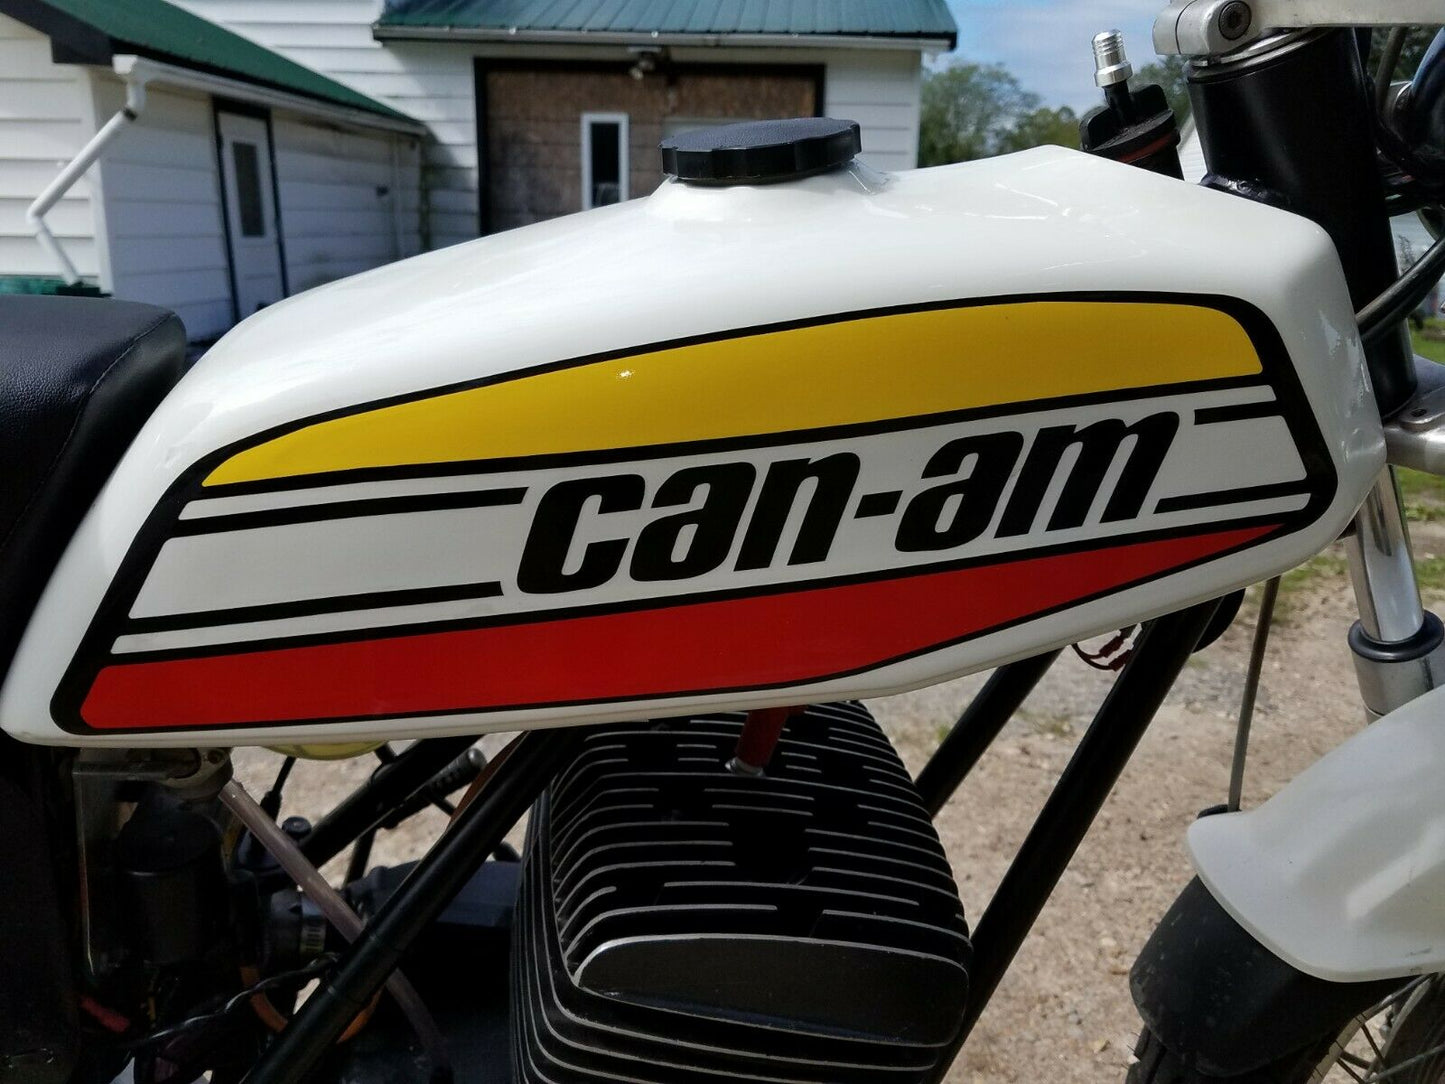 VINTAGE CAN-AM MX-2 175  FULL DECAL SET TANK SIDE COVER FENDERS CAP